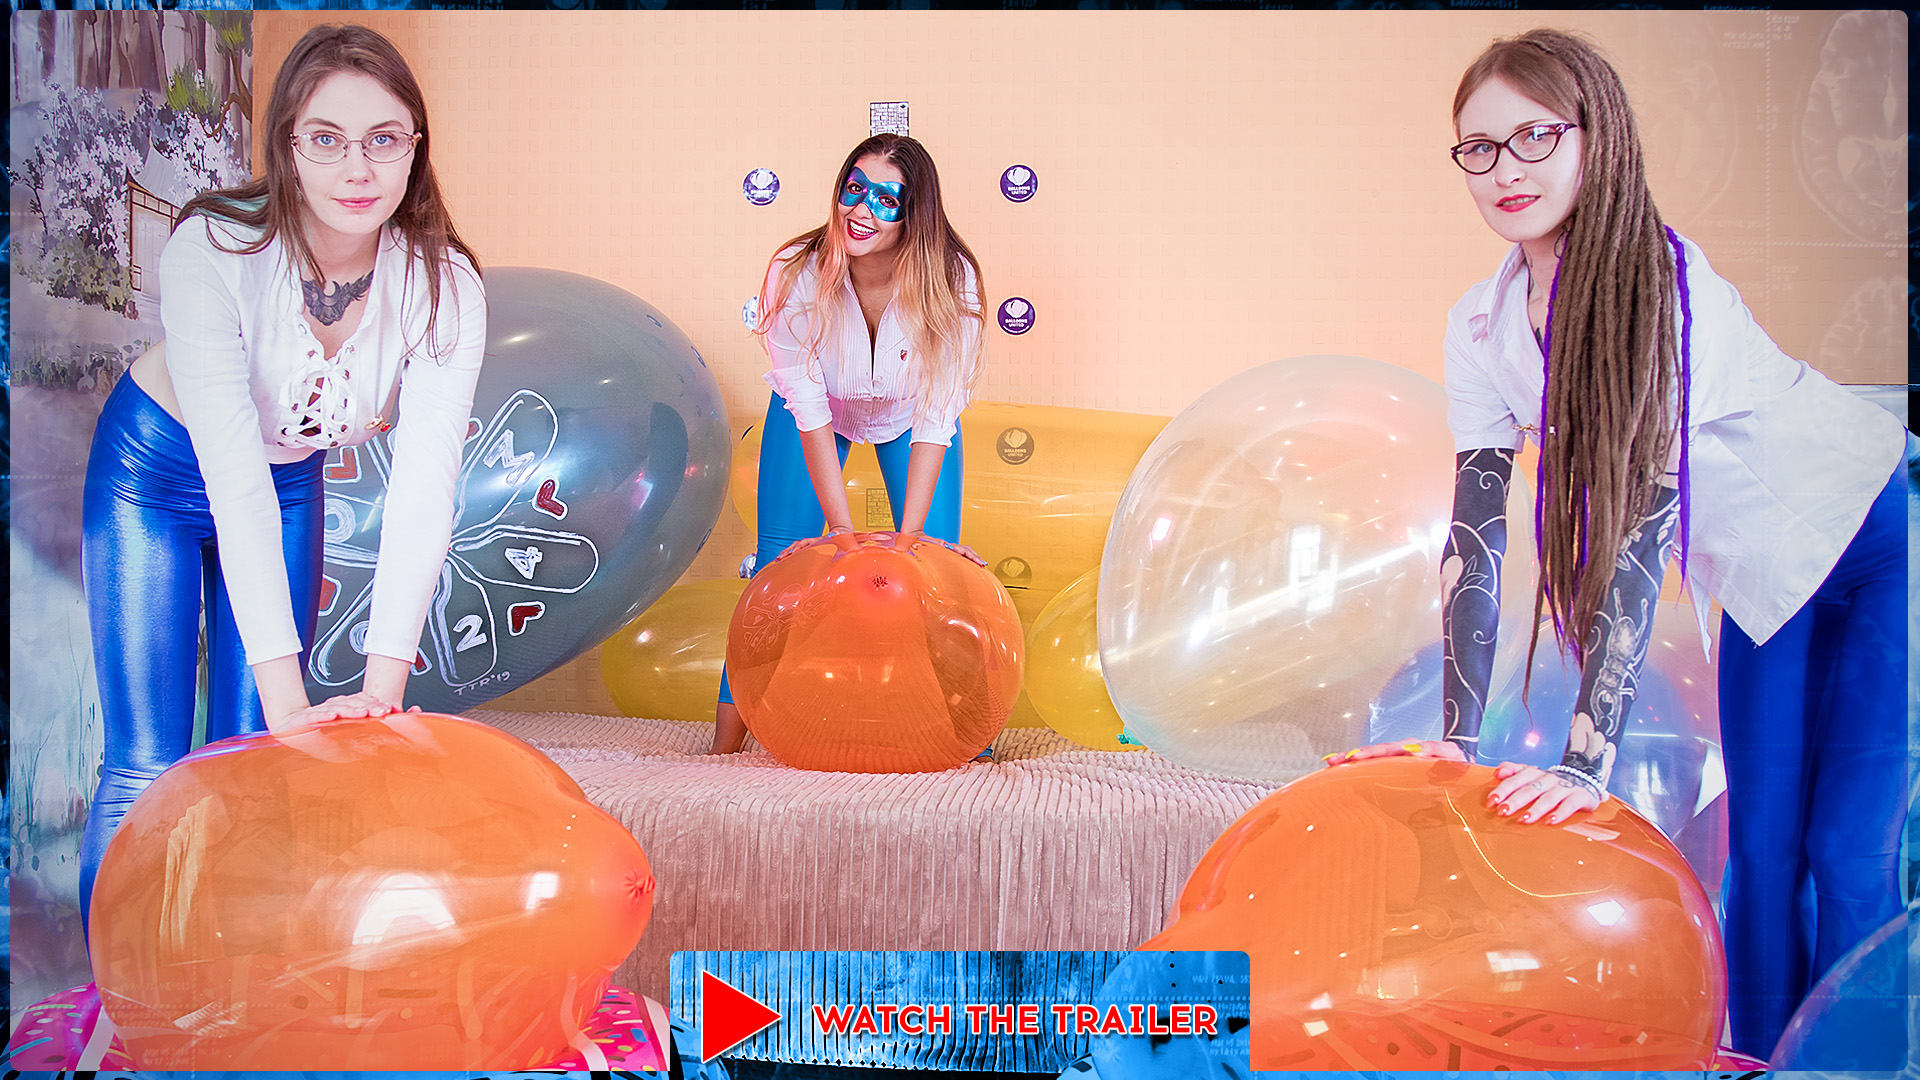 Big set of balloons are demonstrated in this webcam show